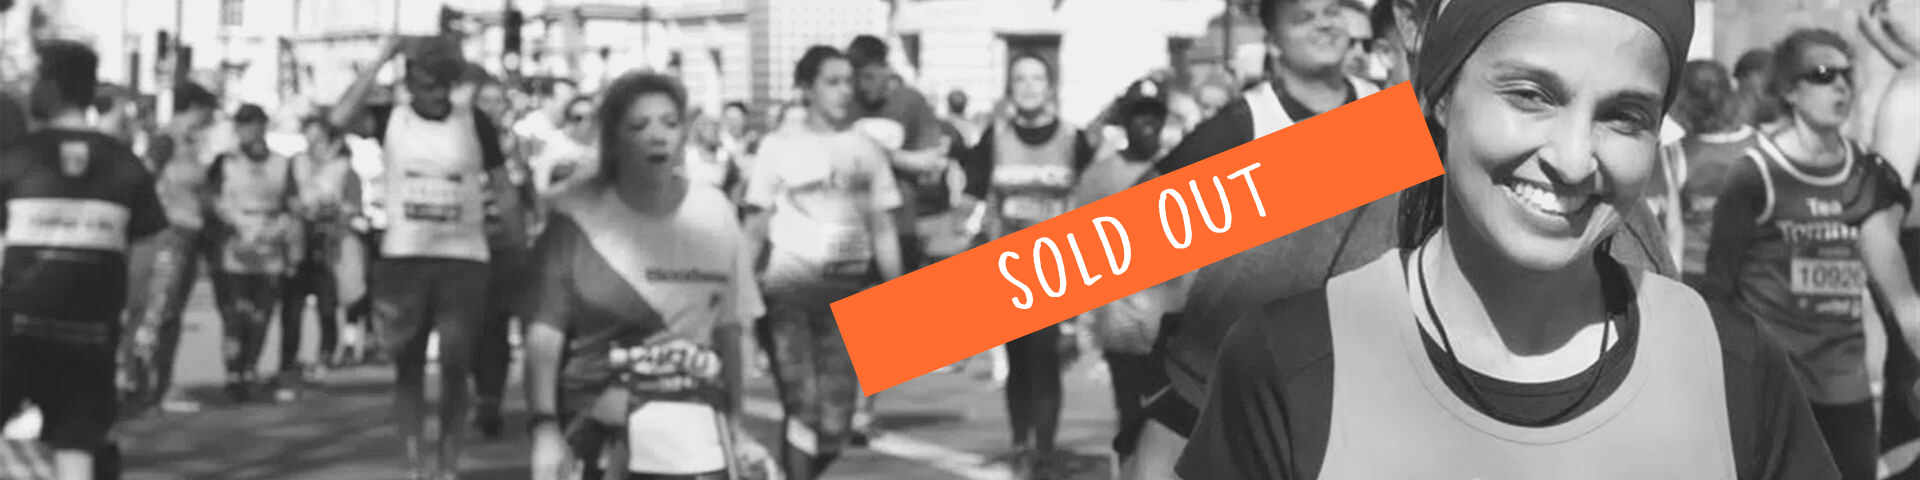 LLHM Banner Sold Out